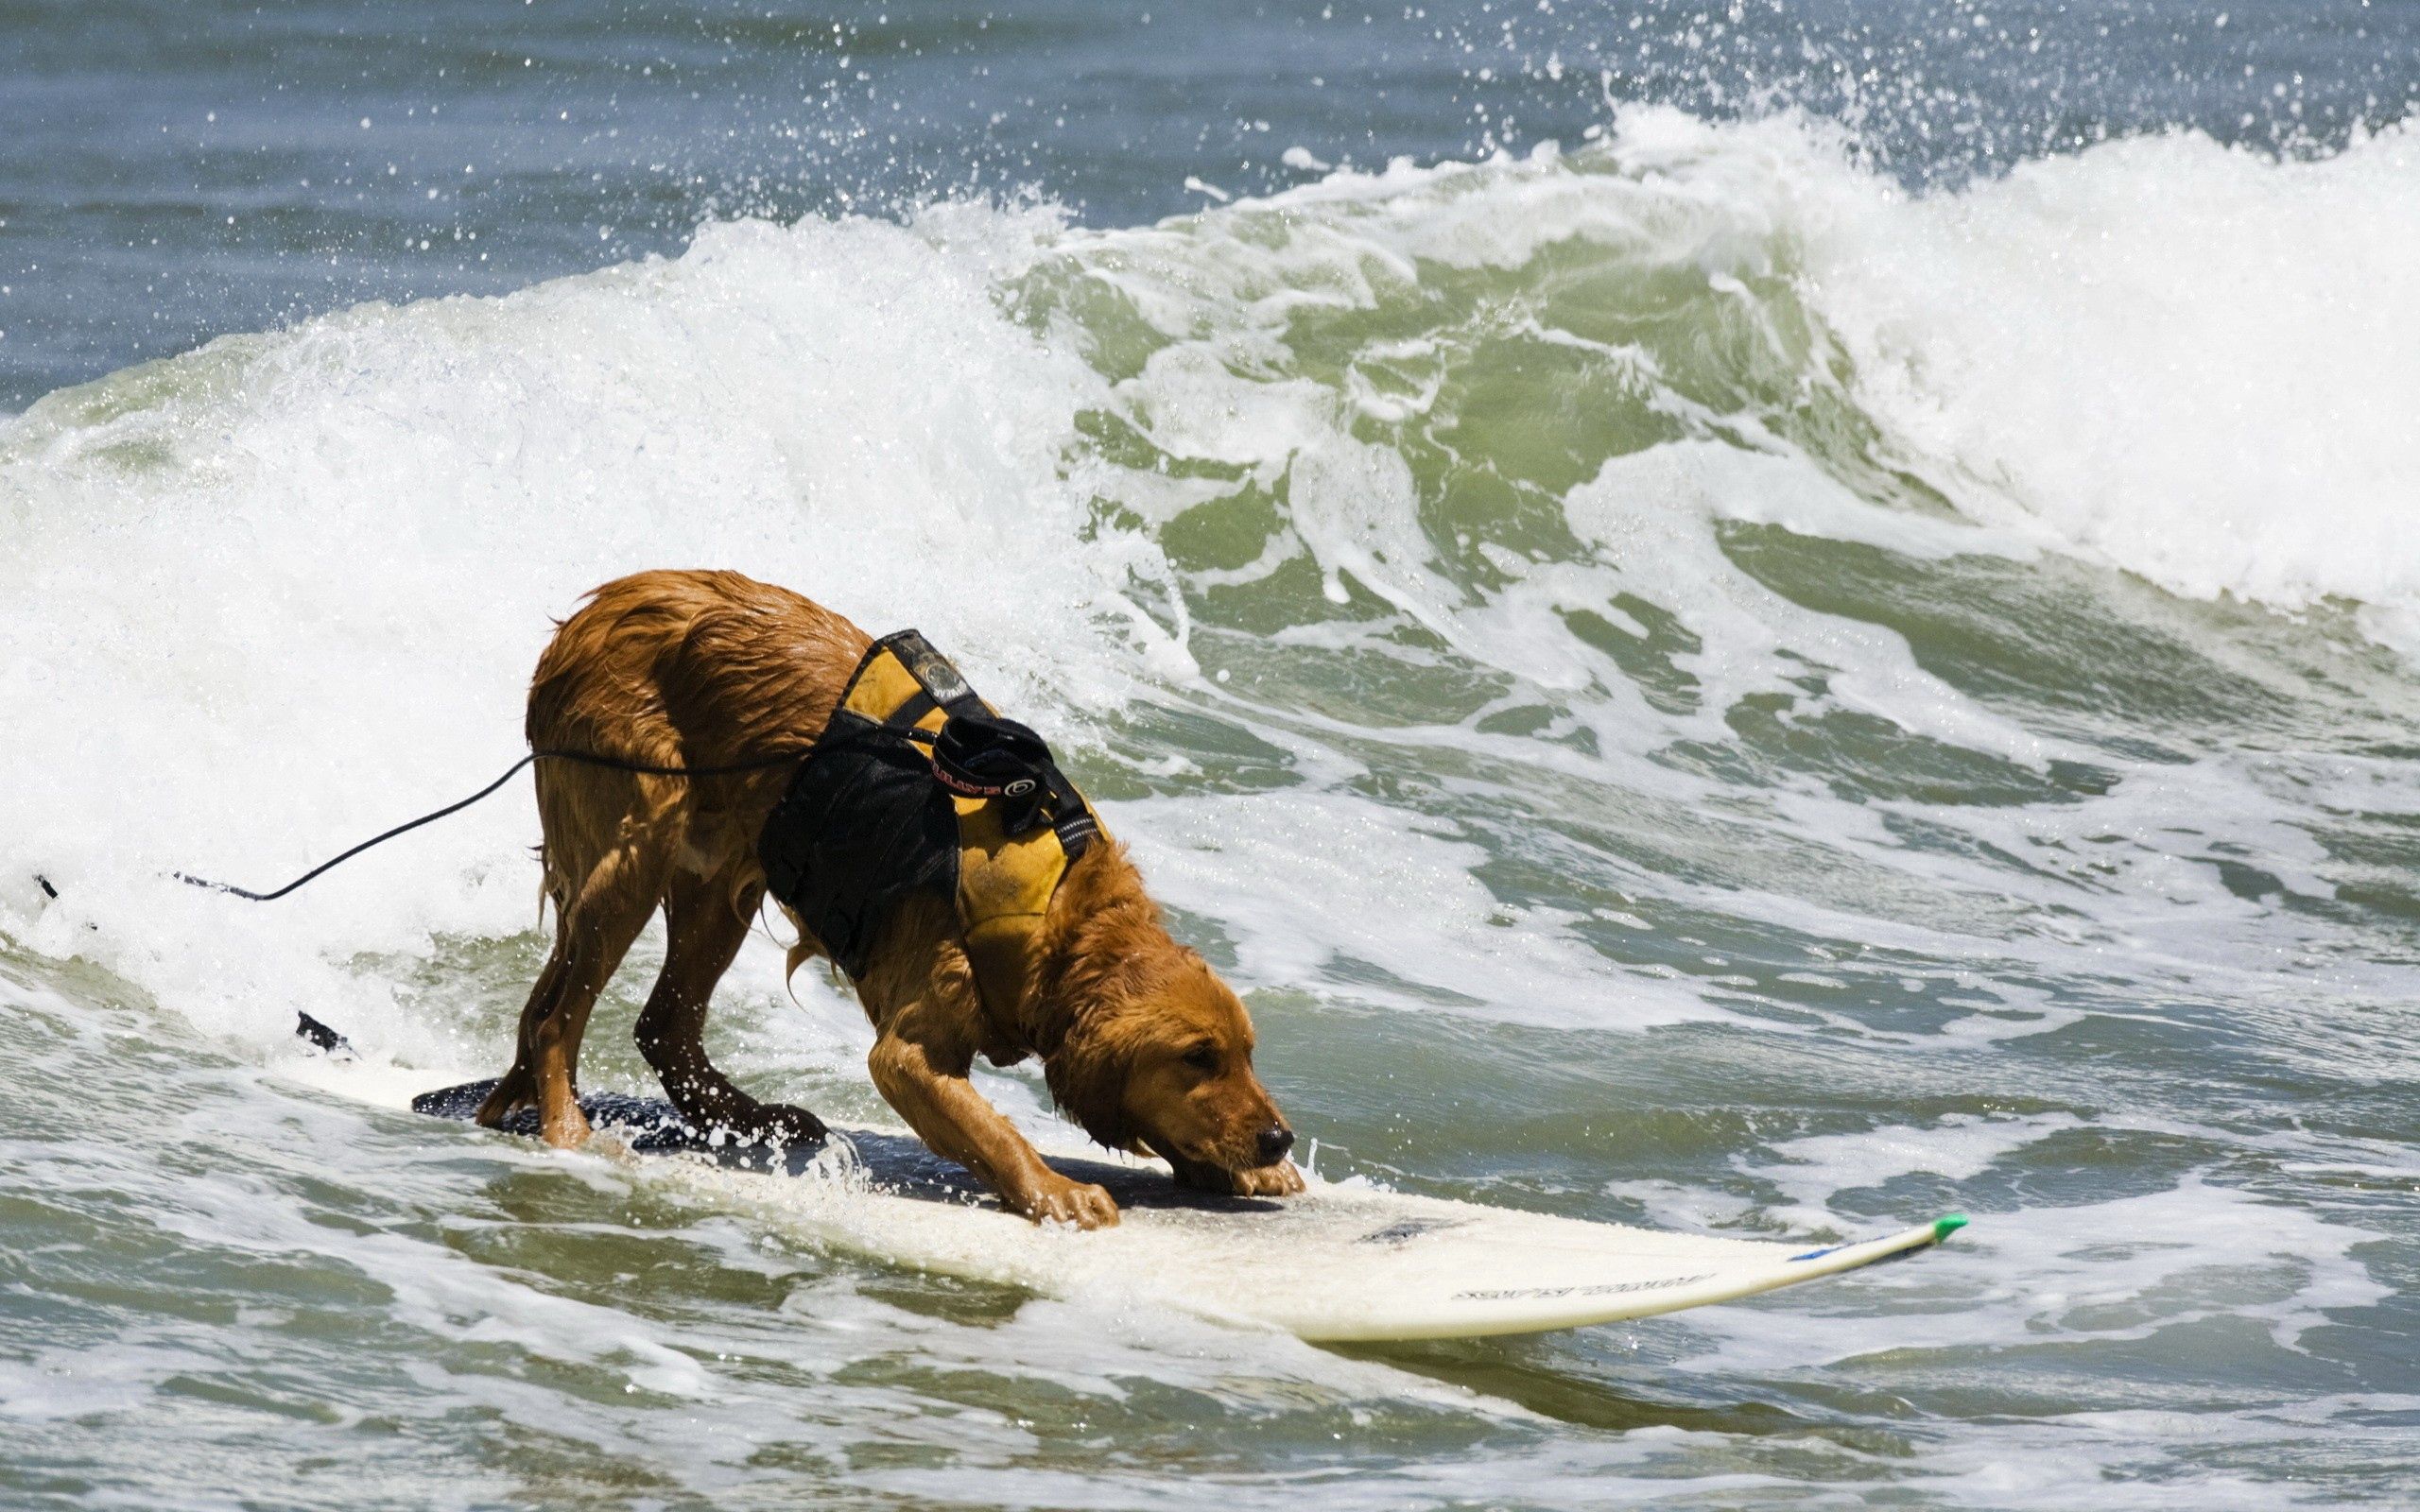 New Lock Screen Wallpapers animals, water, sea, waves, serfing, dog, surf